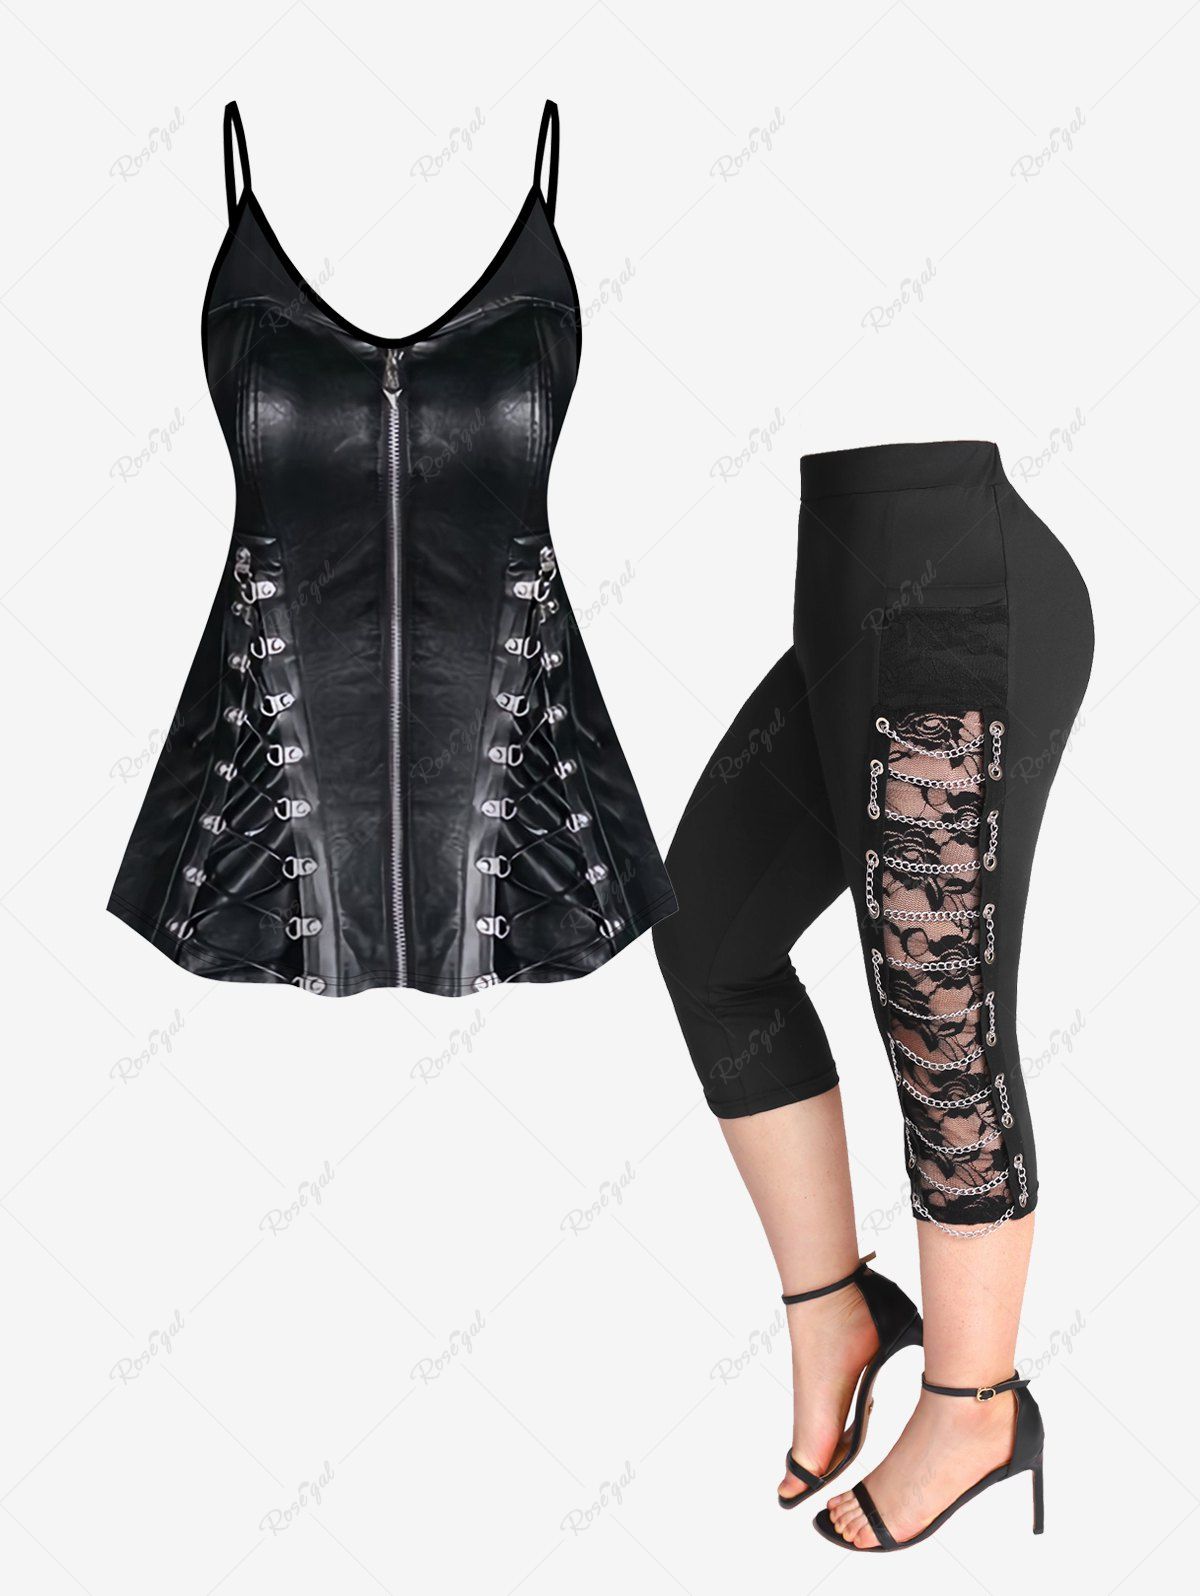 Buy 3D Lace Up Zipper Print Cami Top (Adjustable Shoulder Strap) and Chains Braided Floral Lace Capri Leggings Plus Size Outfits  